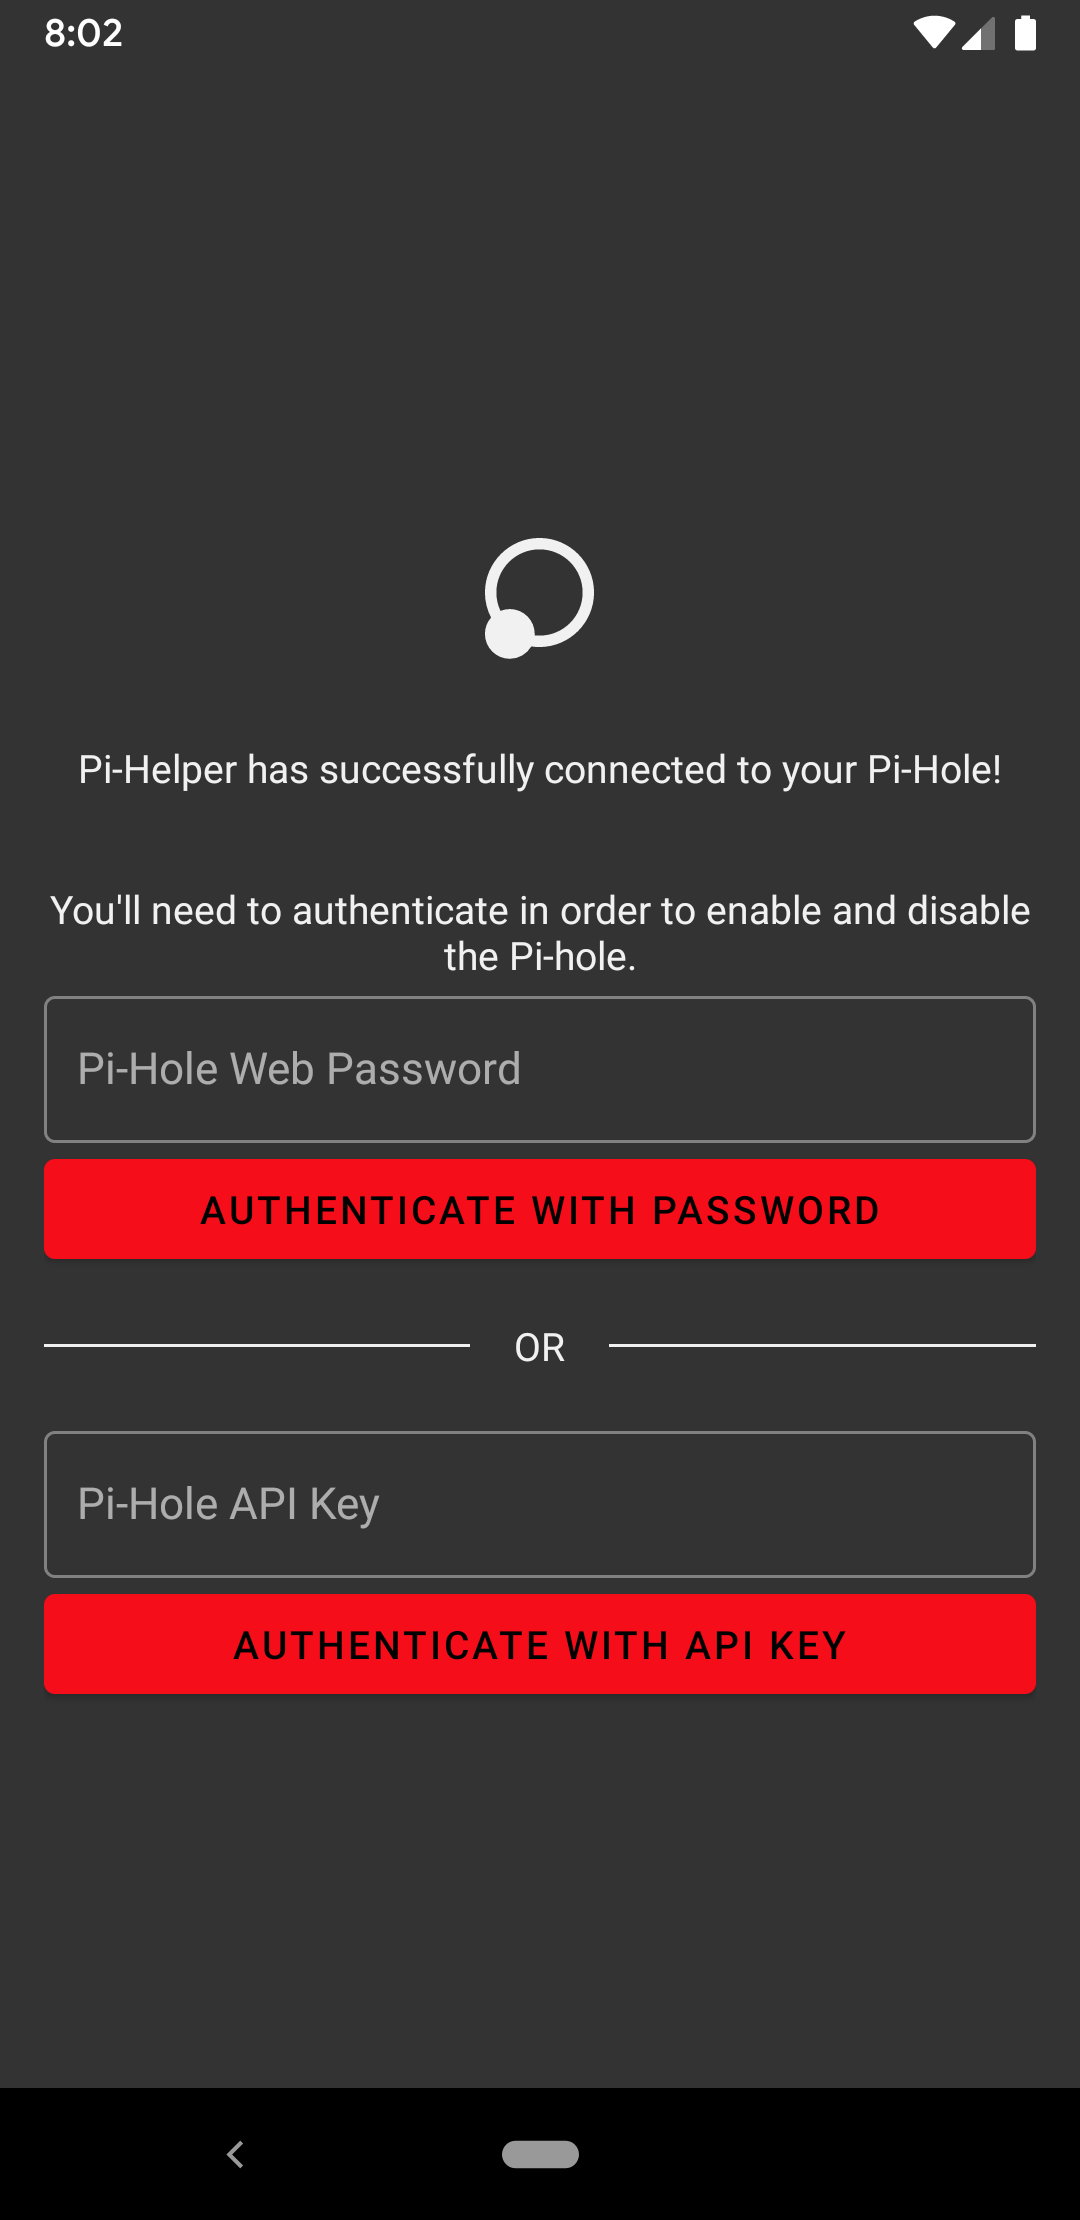 A screenshot of the Android app for Pi Helper where the user is prompted to either authenticate via password or API key.